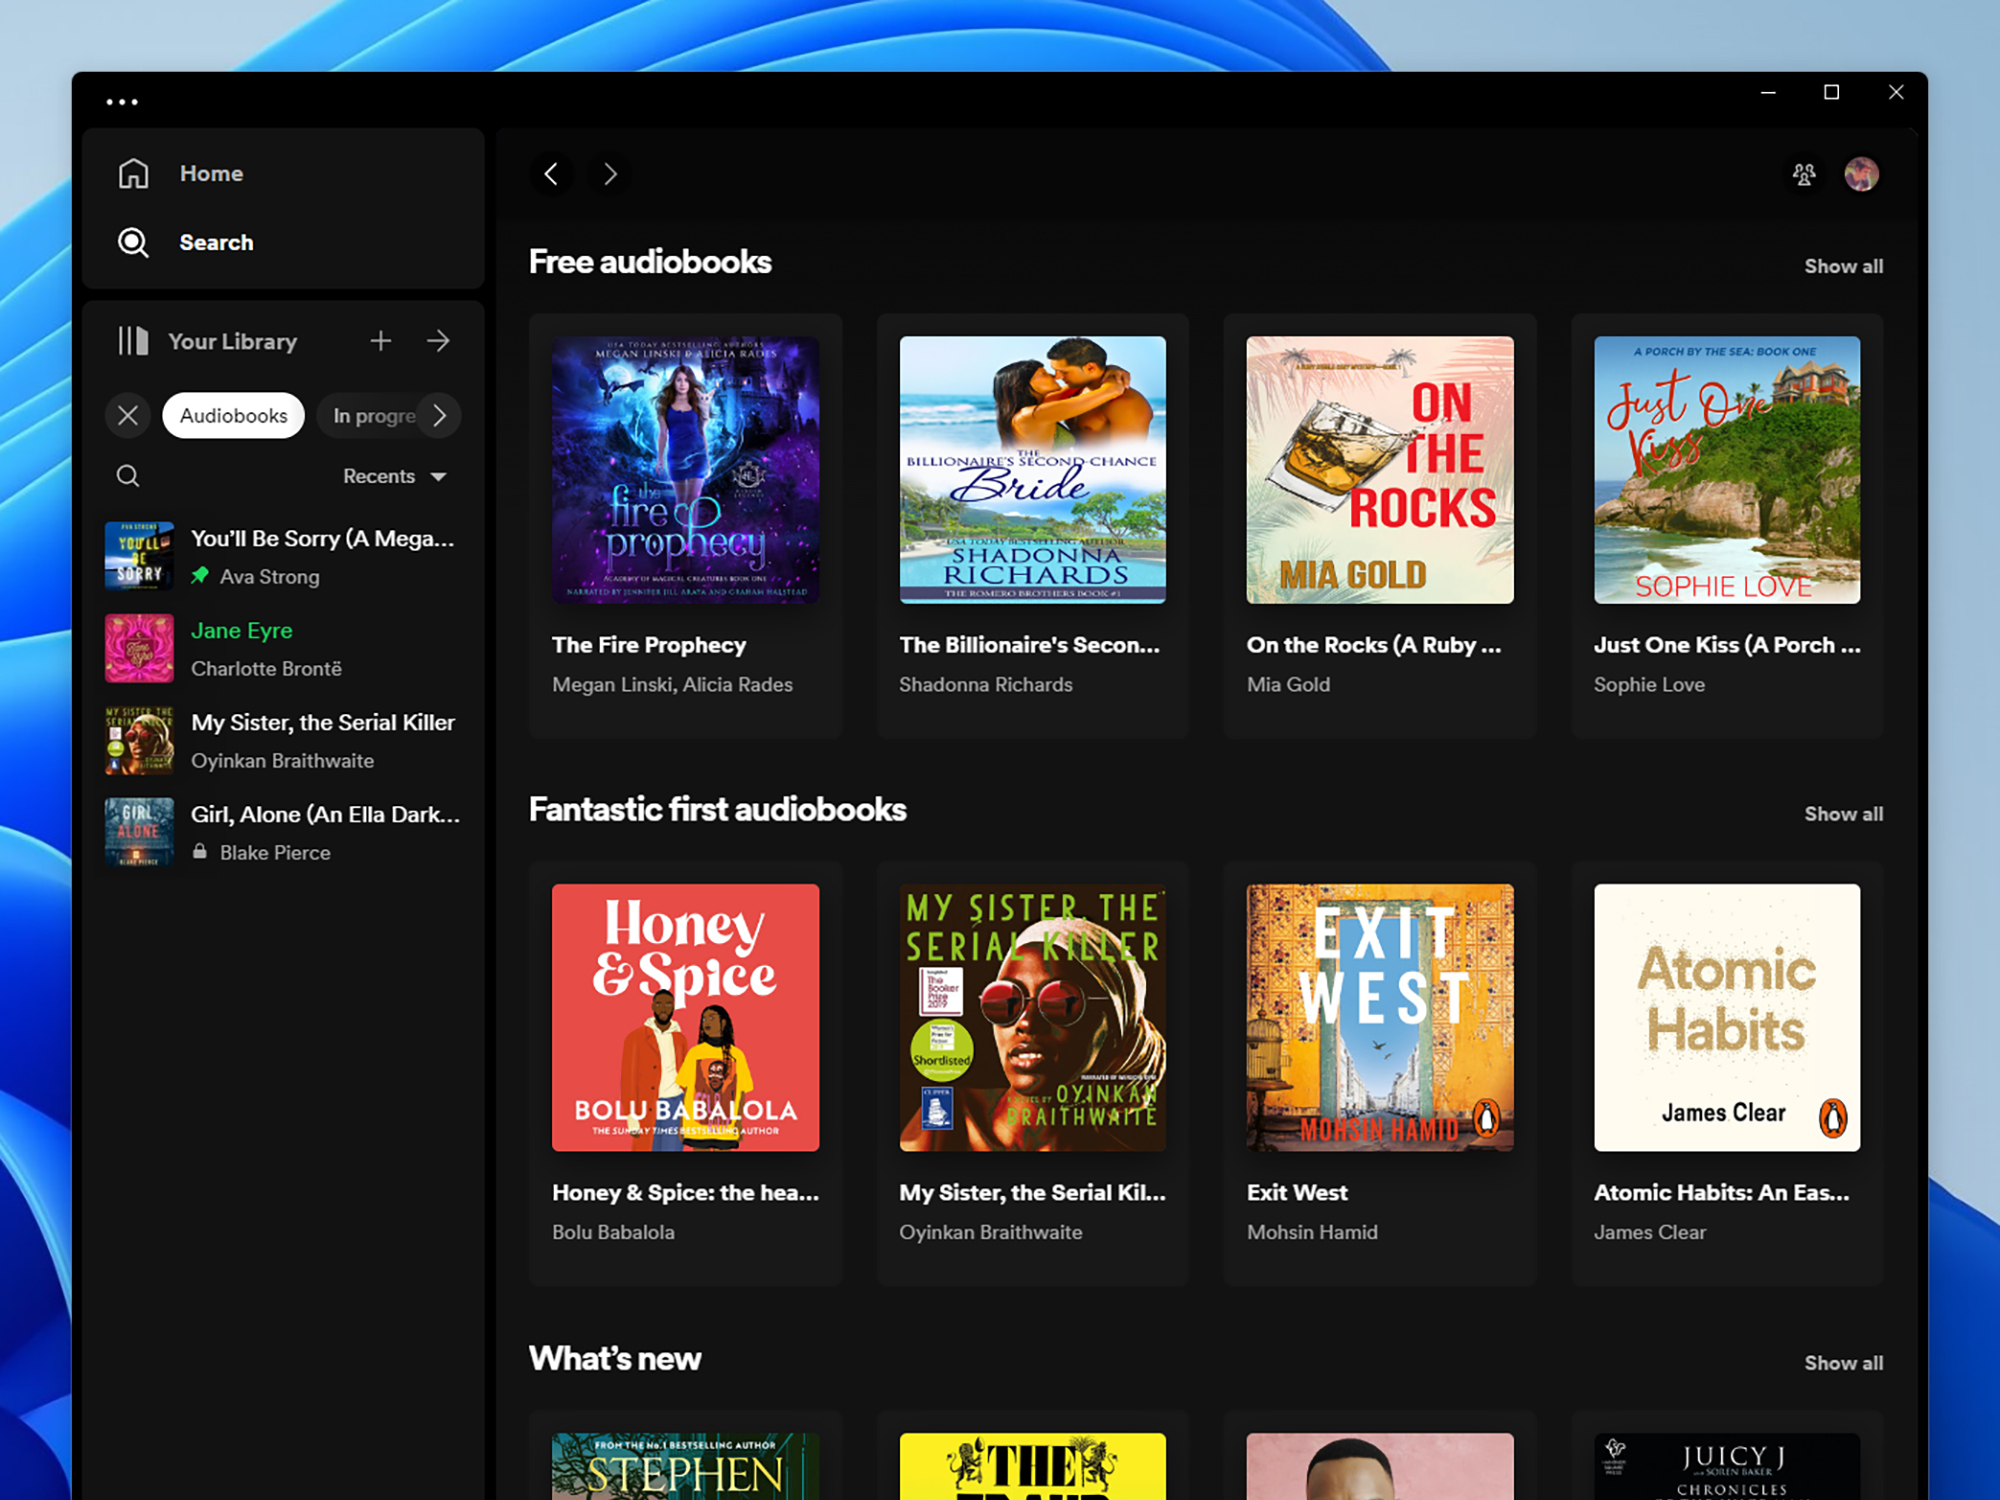 The Spotify audiobooks interface, showing free audiobooks and other options for finding what you might want to listen to.